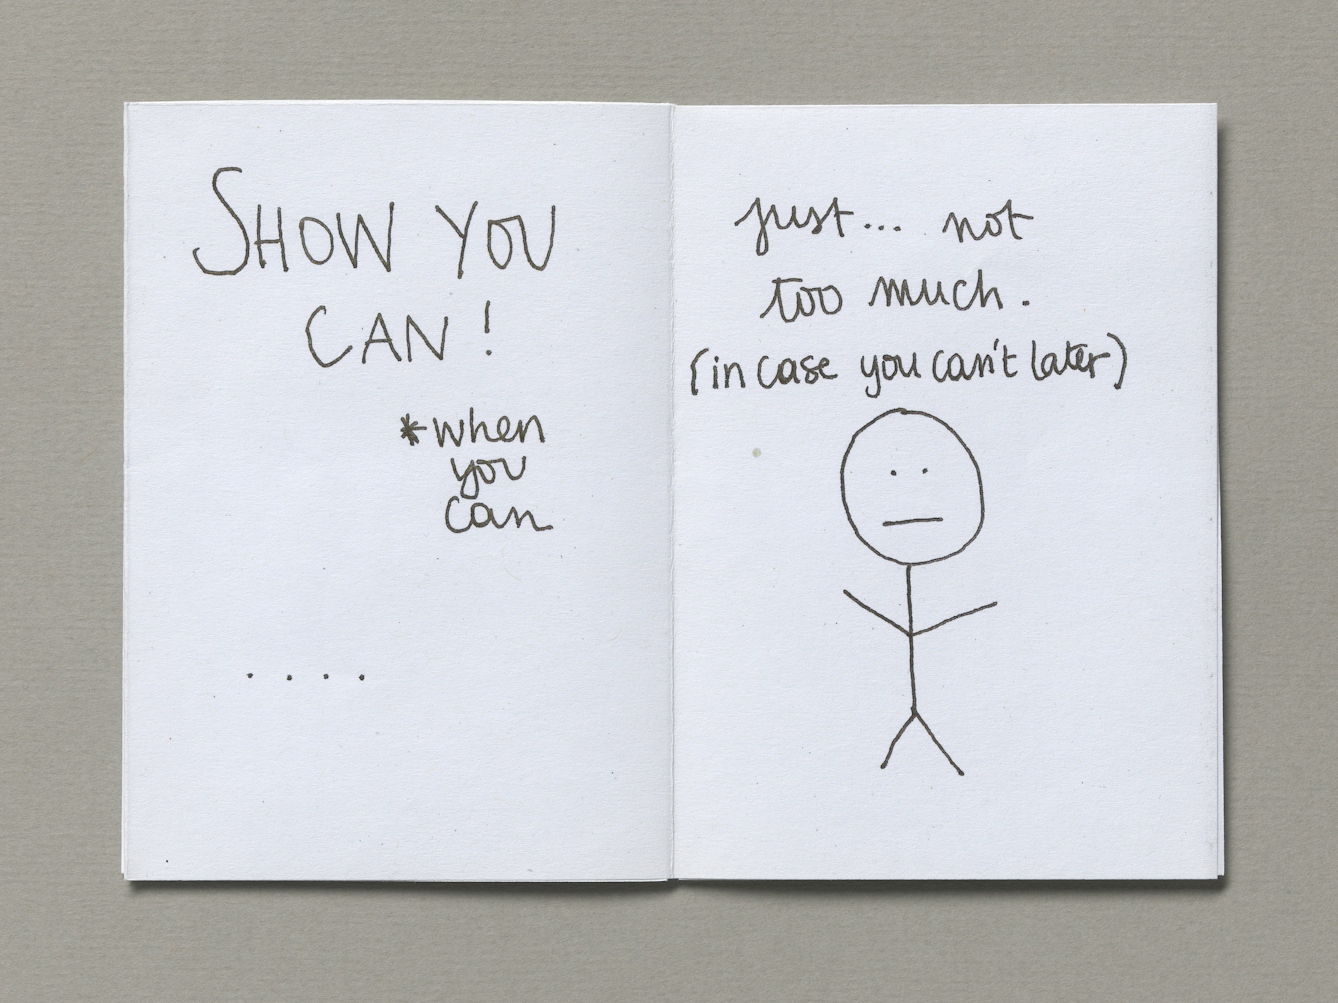 A two-page spread from the zine 'Stuck in the middle: an autistic story'. A folded sheet of white paper has the handwritten text "Show you can! *when you can ...." on the left hand side. On the right side the handwriting says "just... not too much. (in case you can't later). Below this writing is a stick figure with two dots for eyes and a straight line for a mouth.